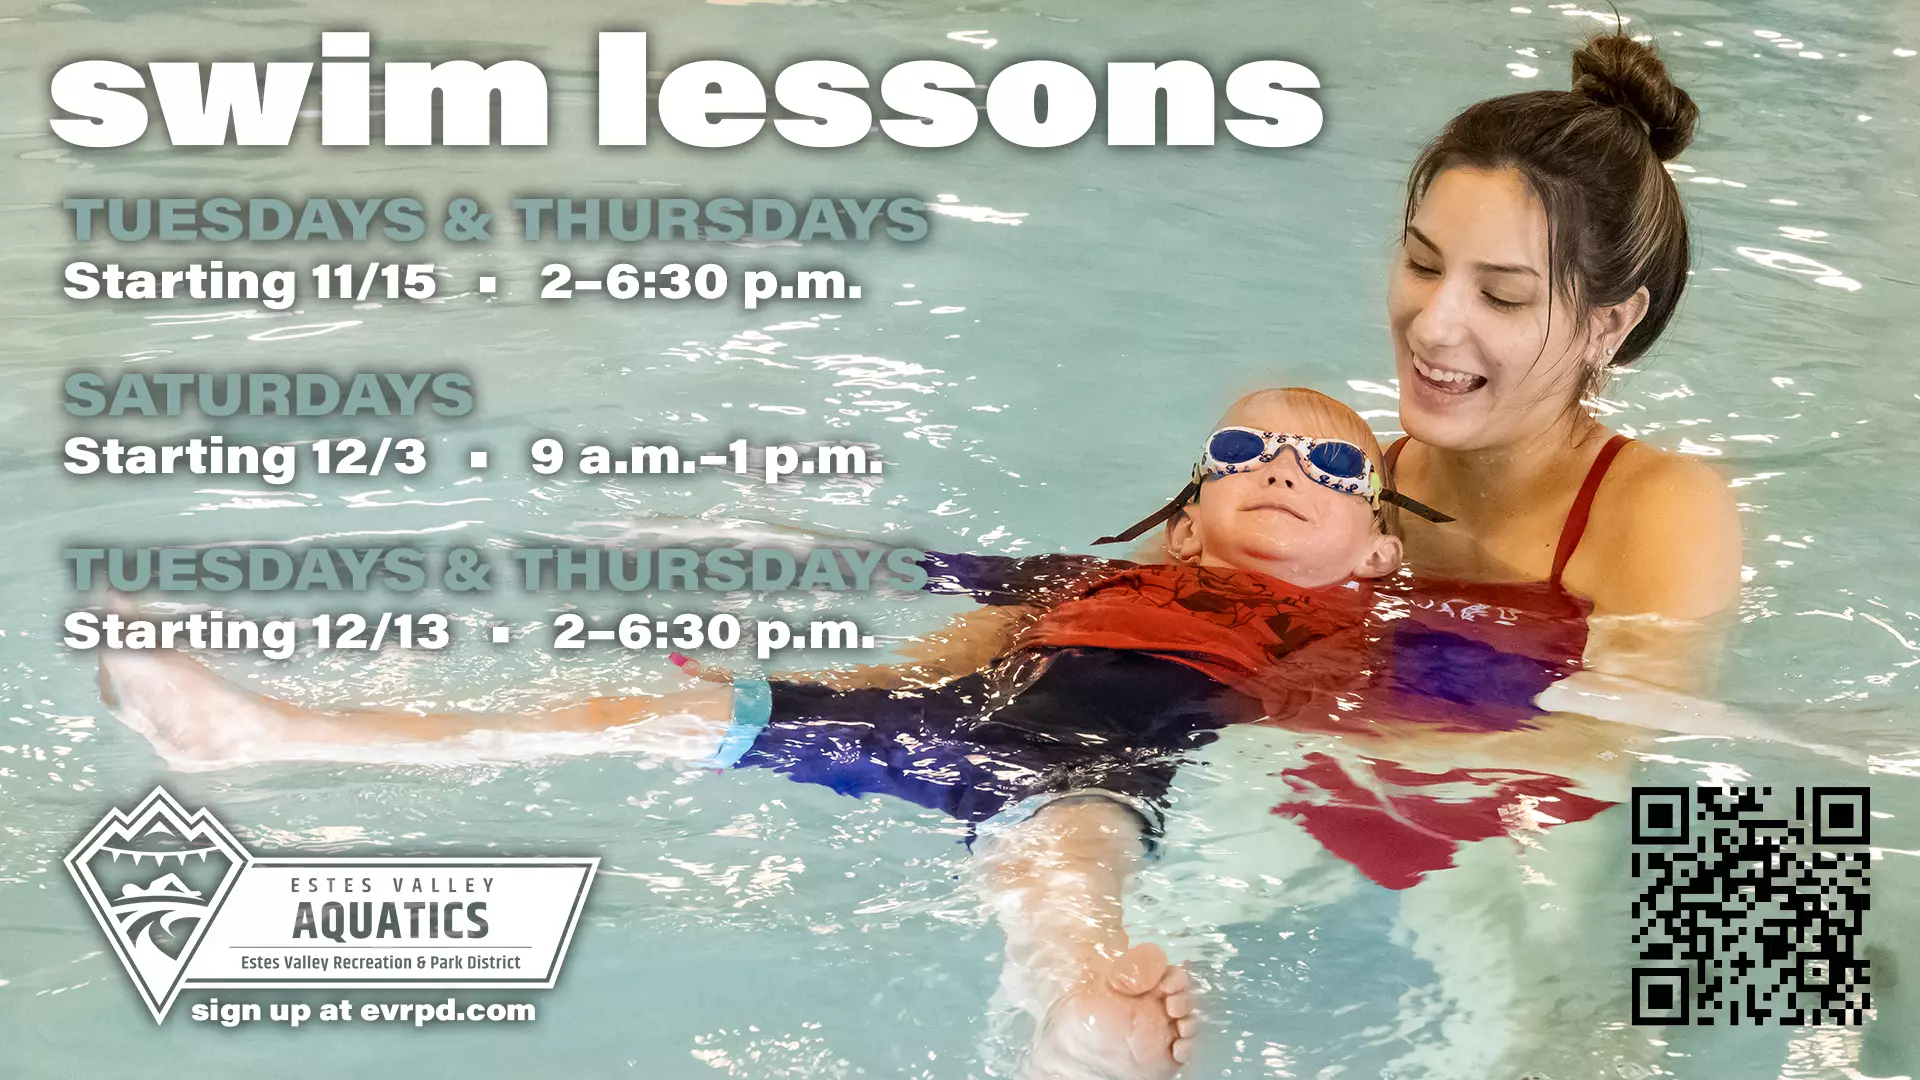 Swim lesson schedule for November and December